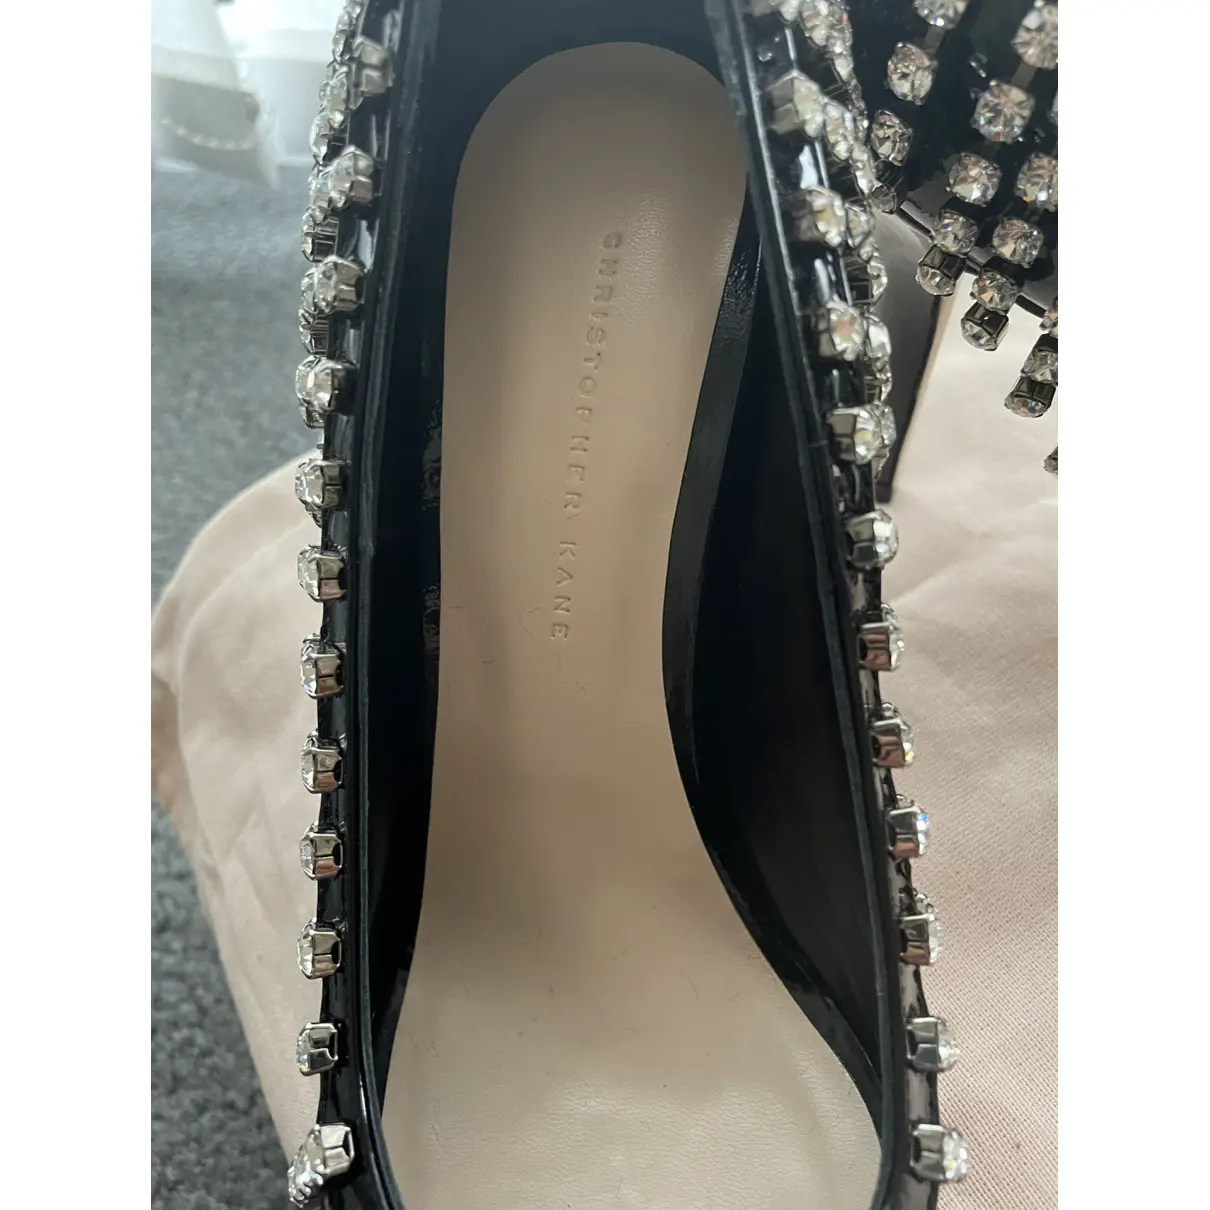 Buy Christopher Kane Patent leather heels online